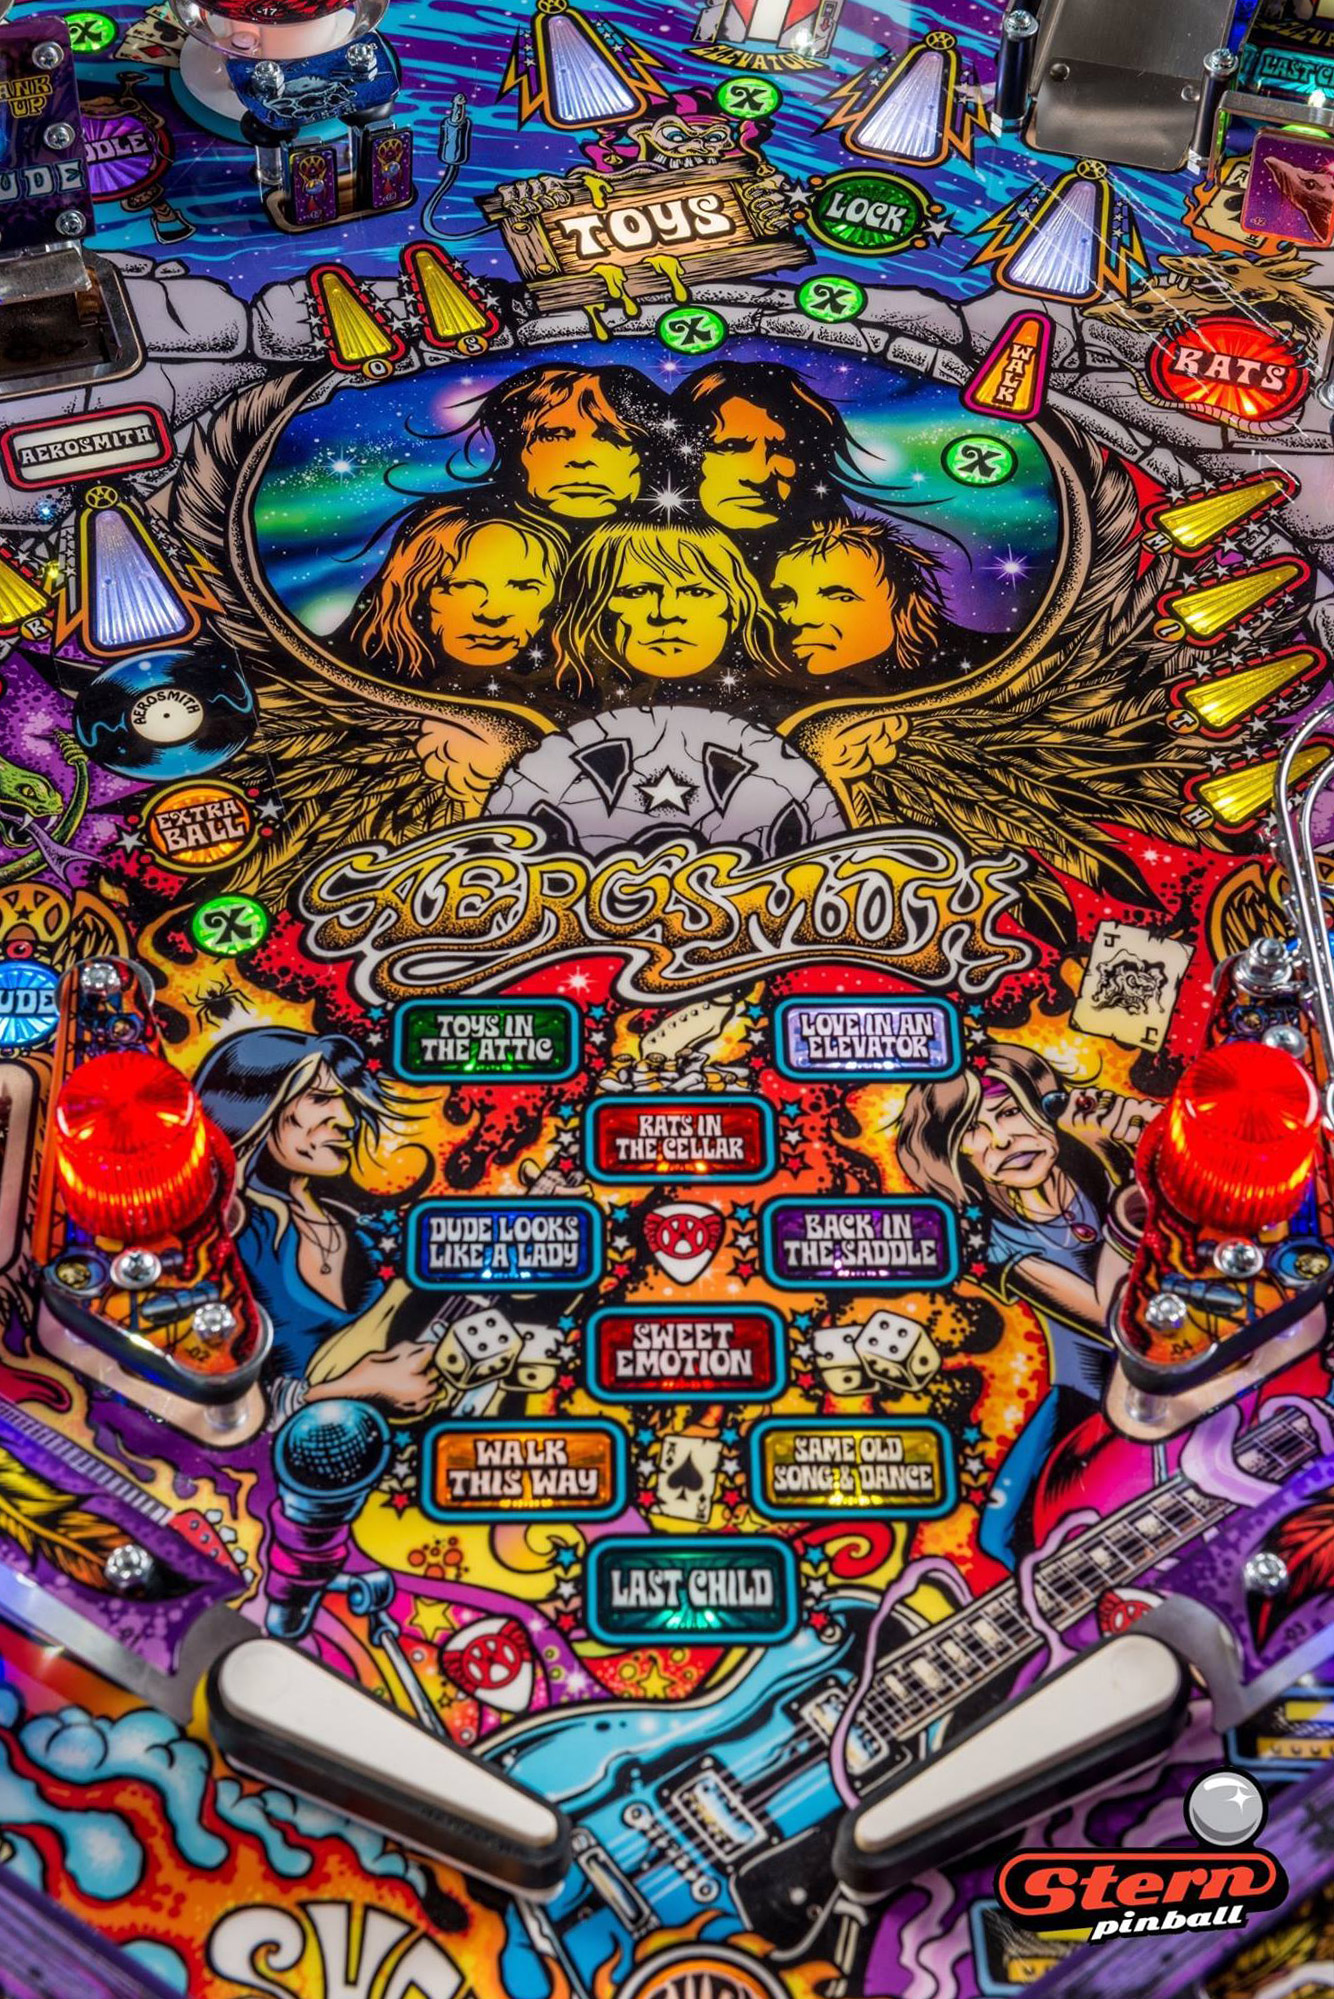 Details about   AEROSMITH PINBALL ICONIC STEVEN TYLER MIC MOD Now with  Color Changing LEDs